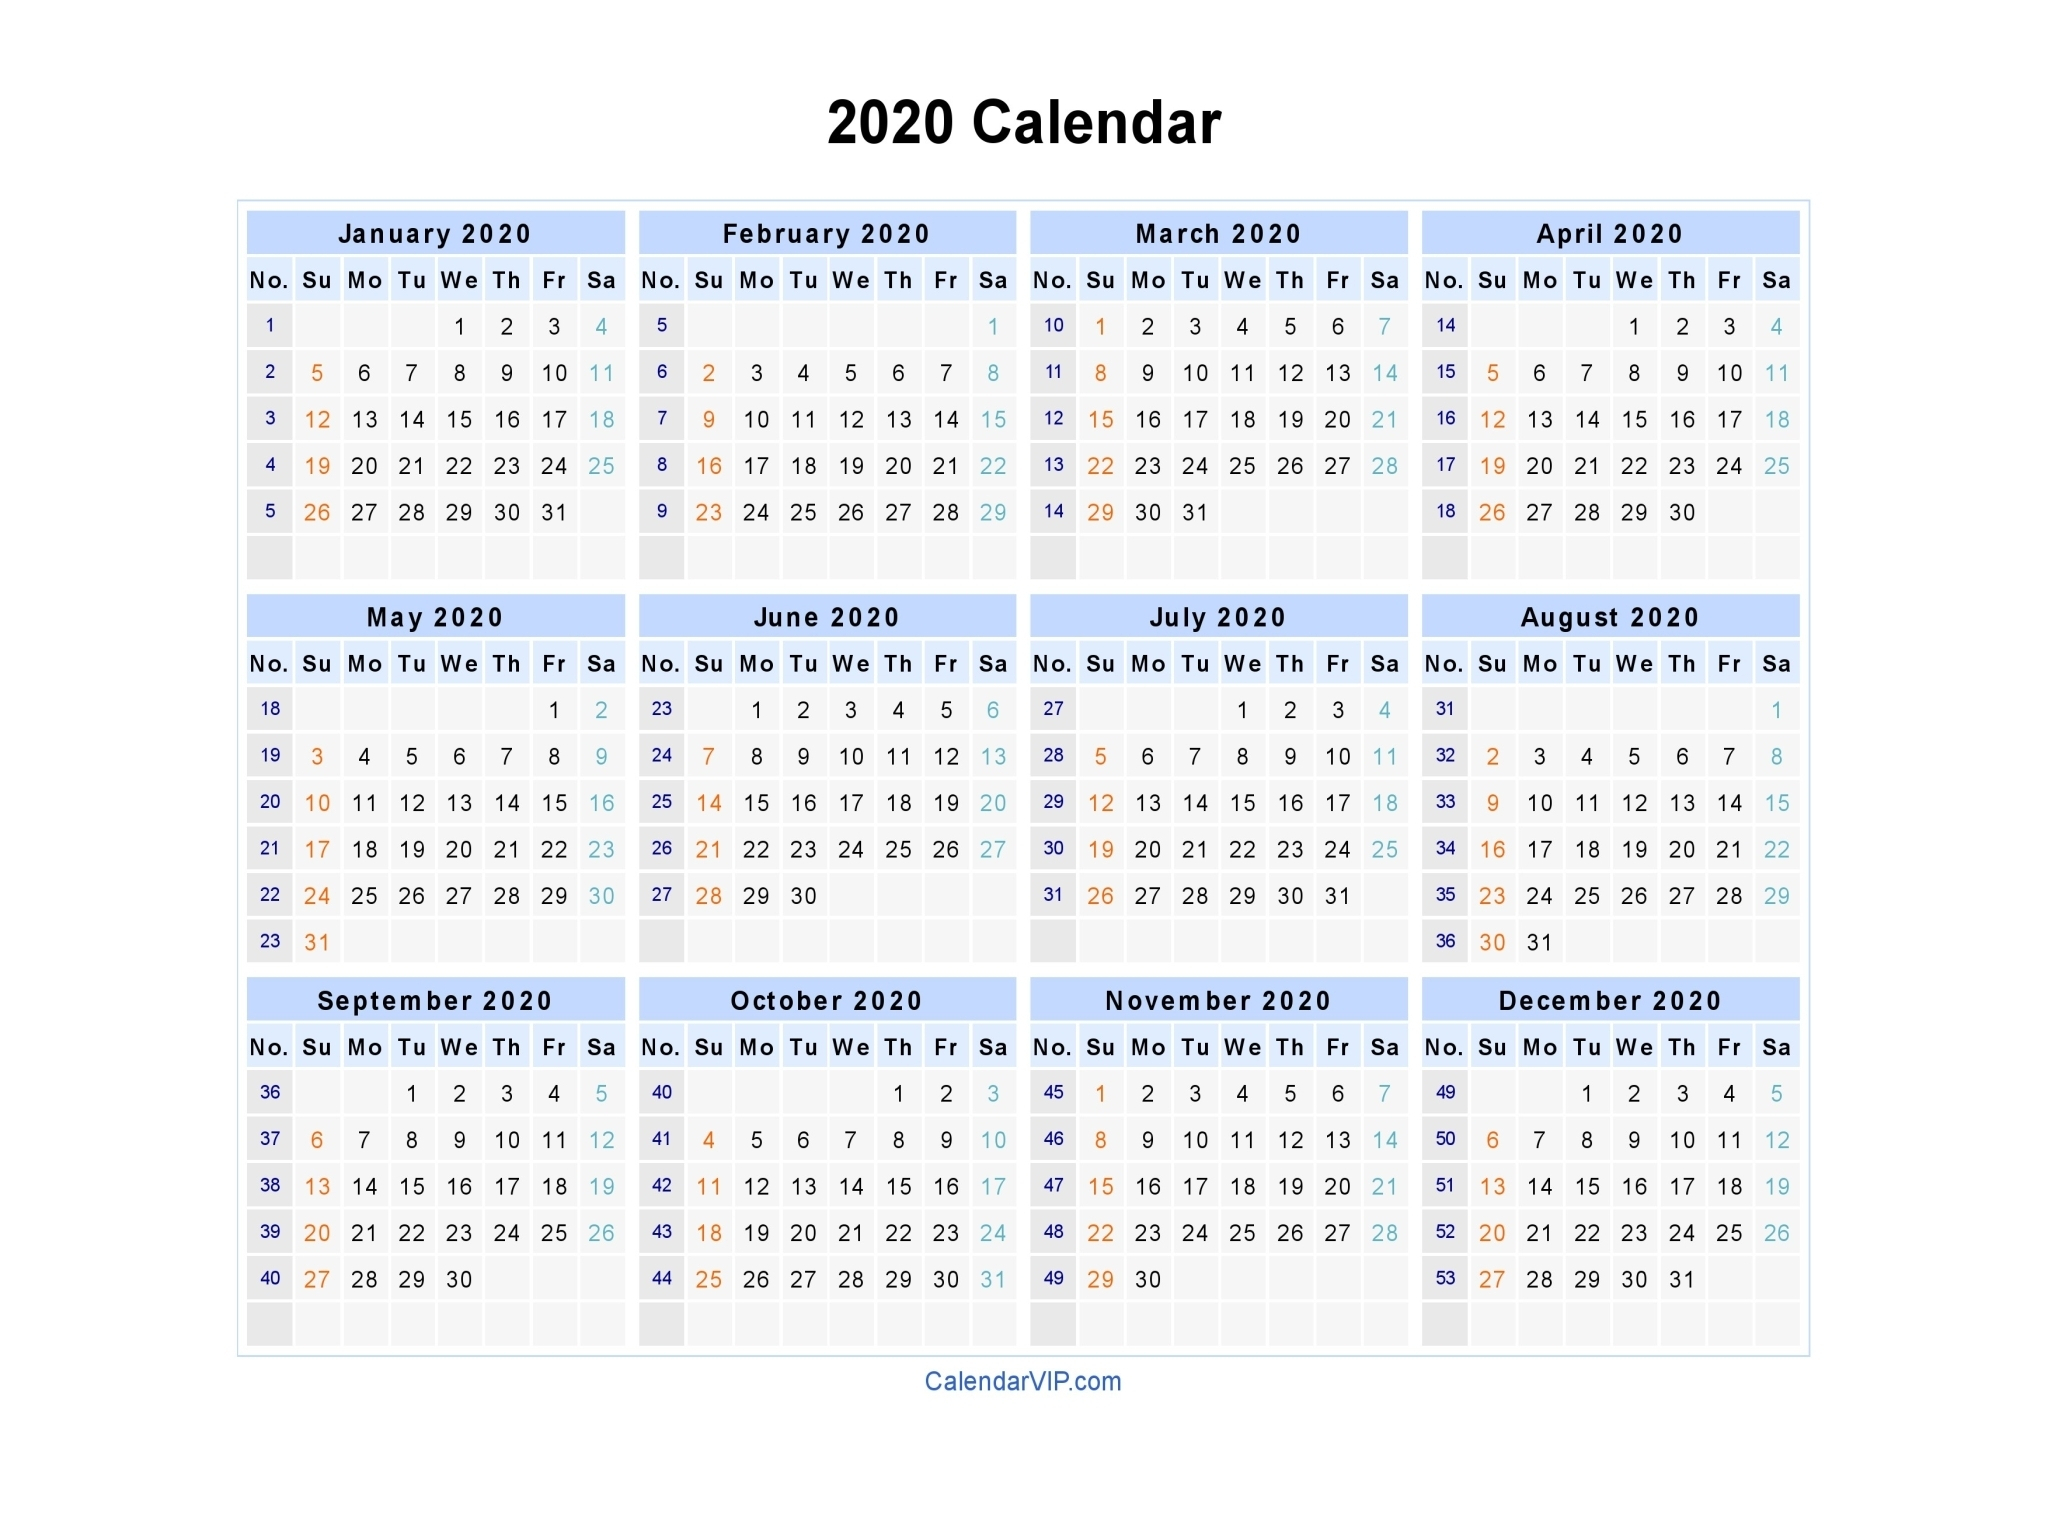 Calendar 2020 Excel Hong Kong | Month Calendar Printable within Free Printable Calendars-Yearly-Denoting Weeks Within Month